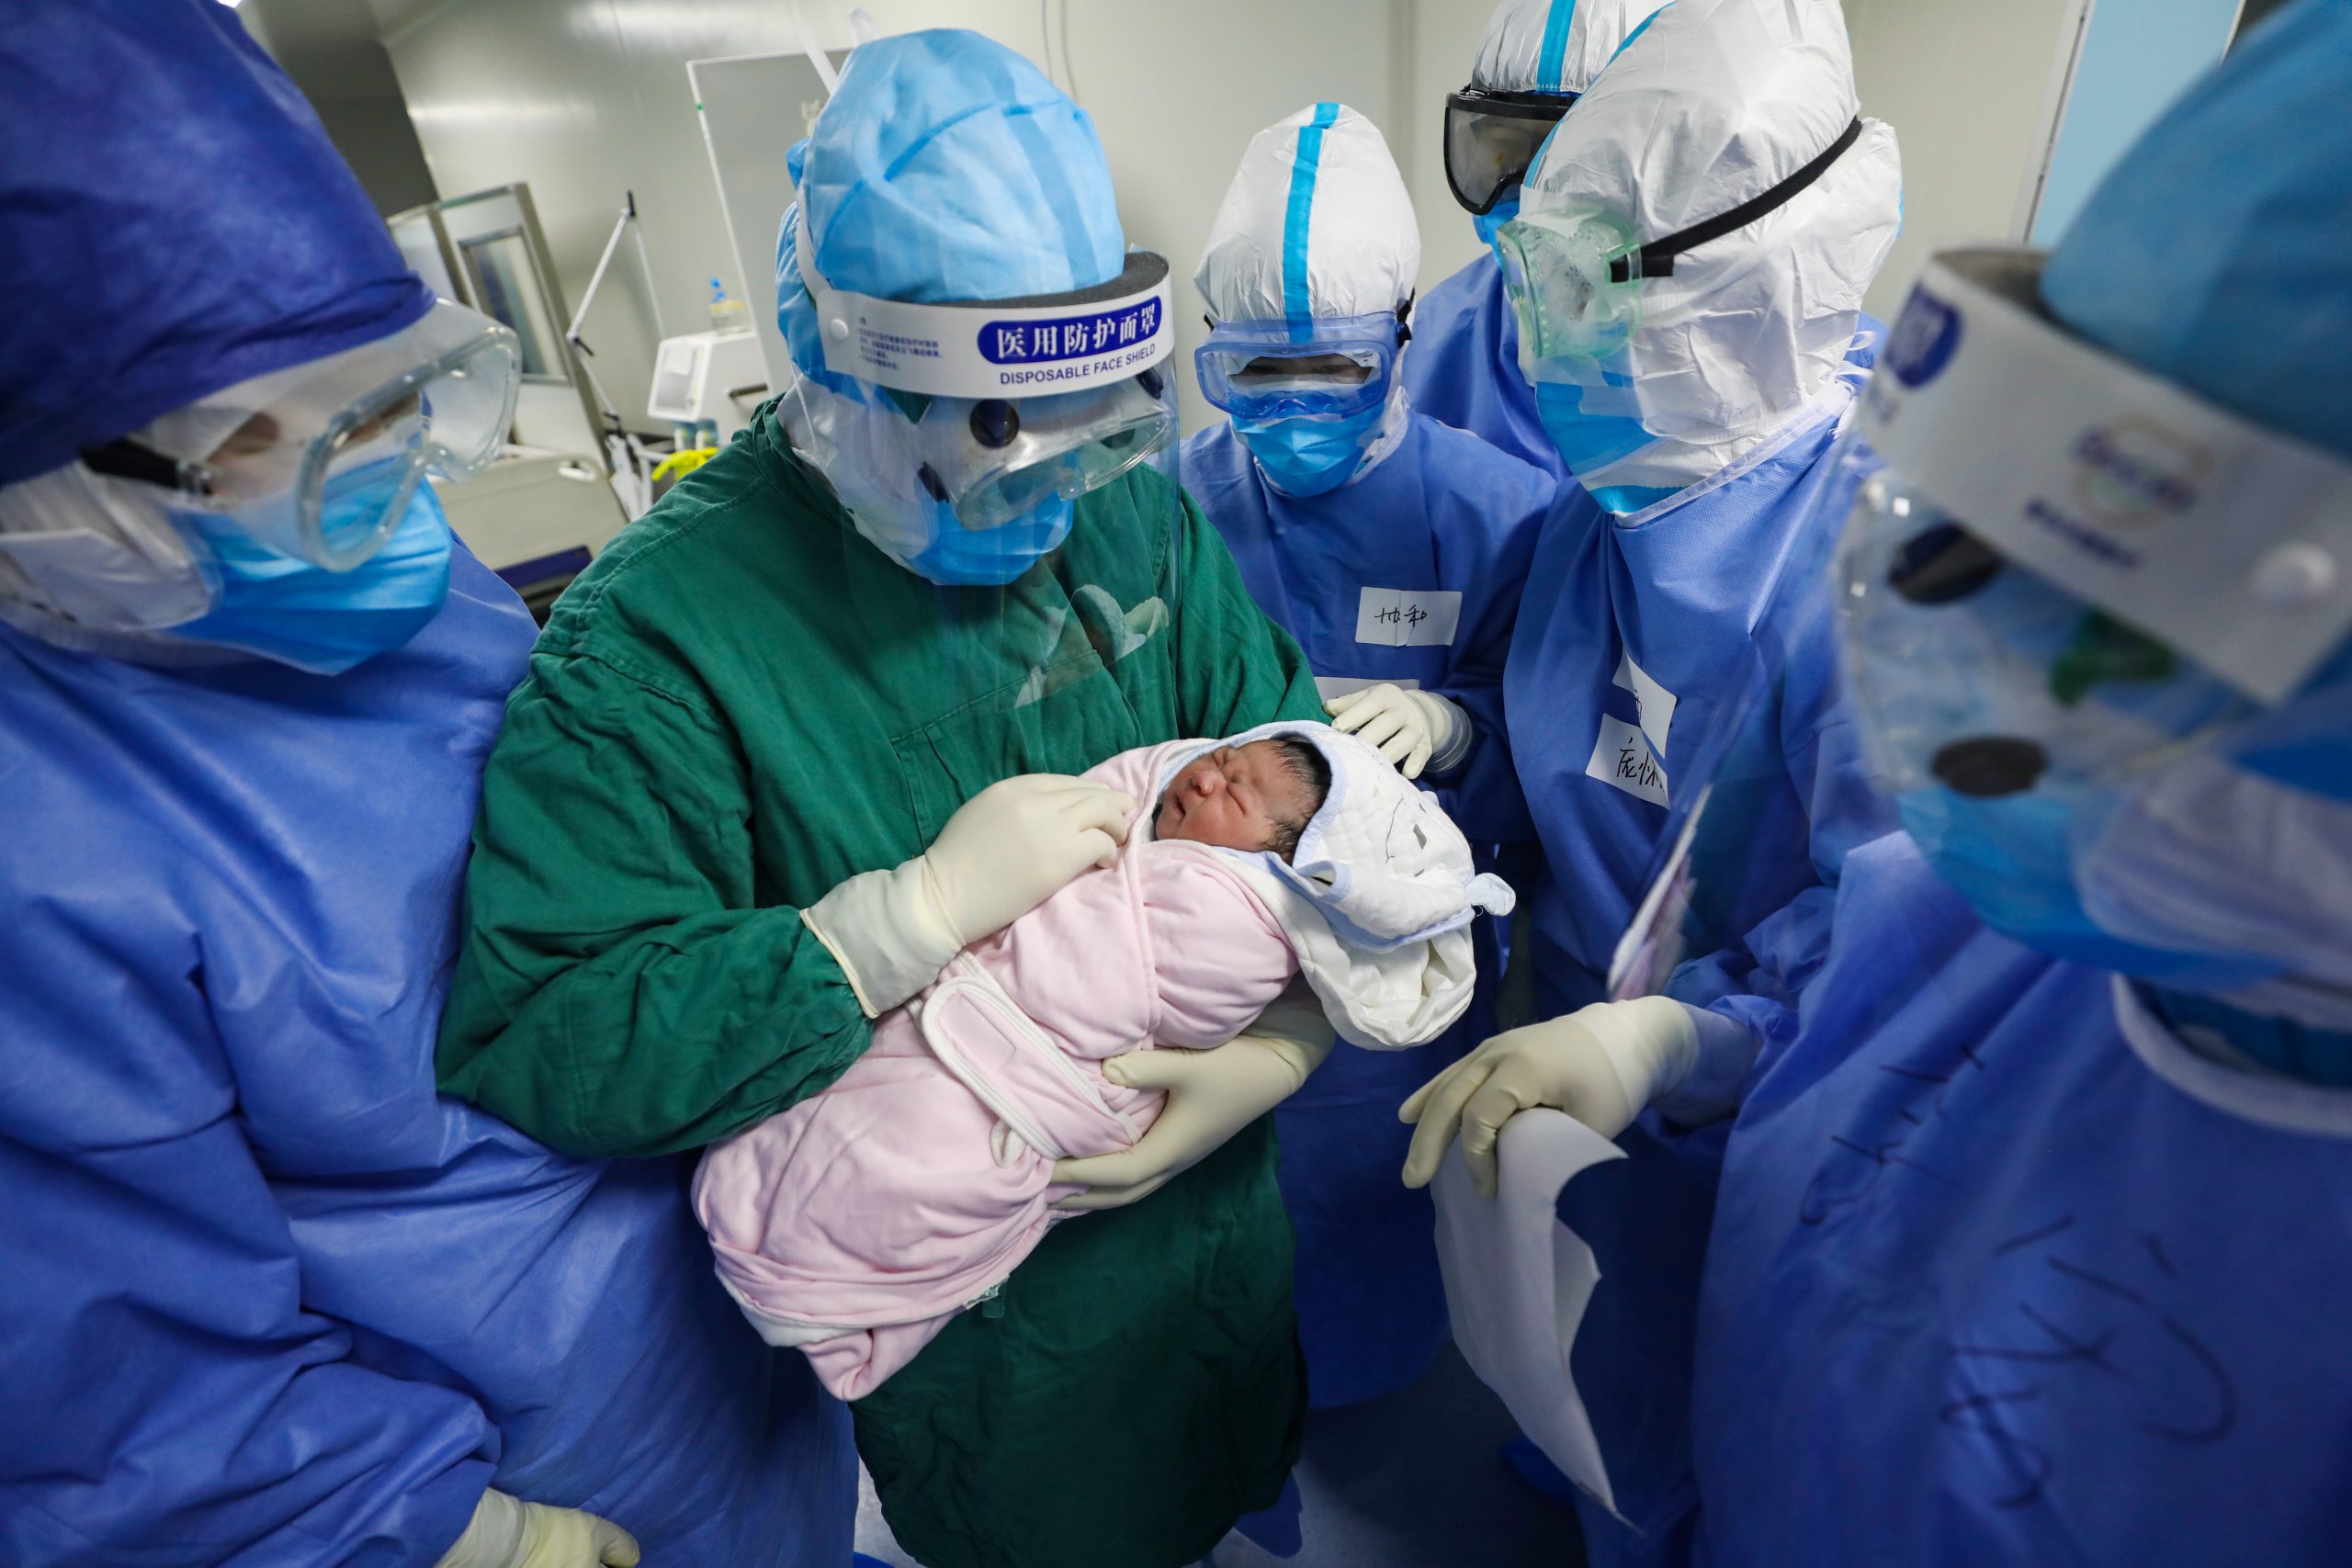 CHINA WUHAN CHILDBIRTH IN COVID-19 HOSPITAL